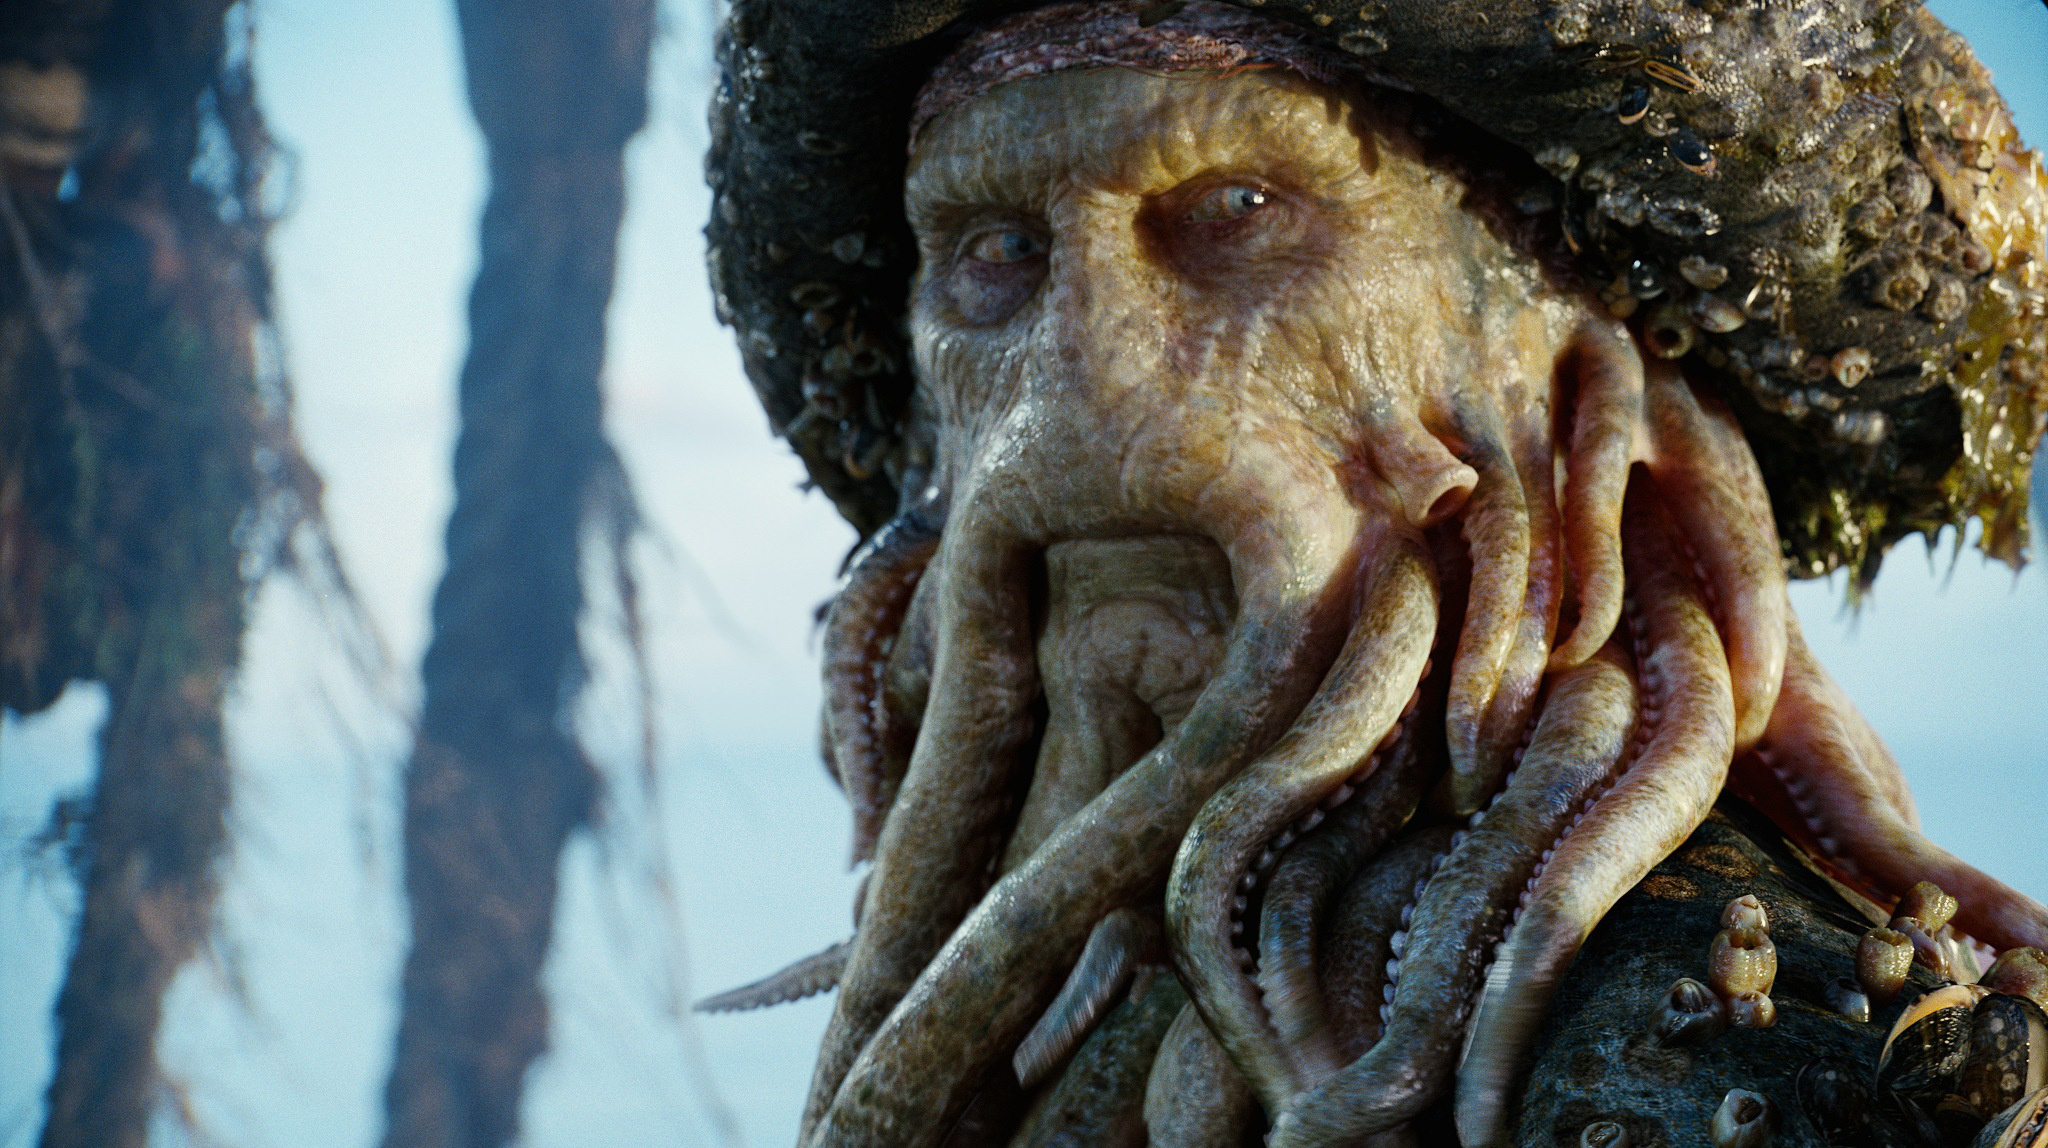 Davy Jones, High definition, Mythical character, Mysterious, 2050x1150 HD Desktop